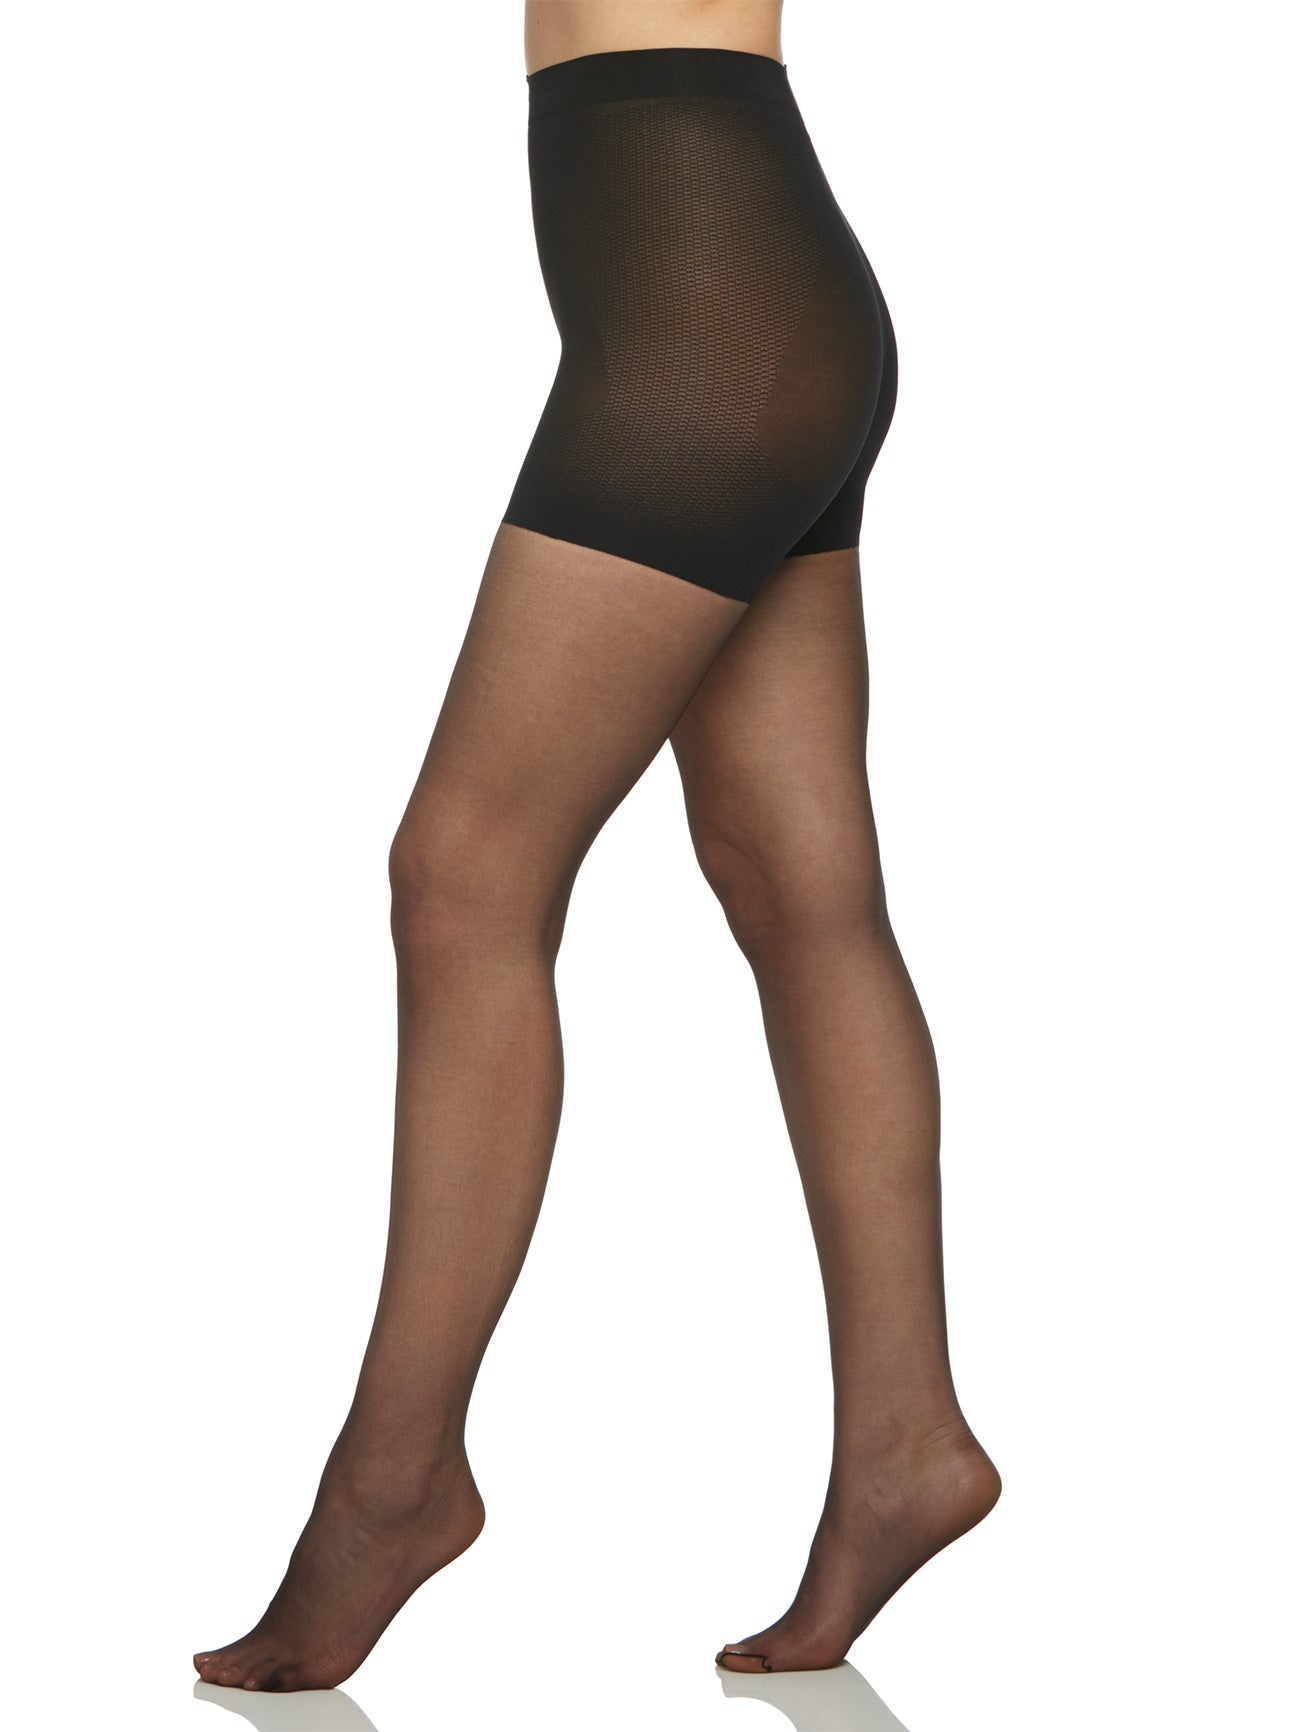 The Easy On! Luxe Matte Sheer Control Top Pantyhose with Sheer Toe